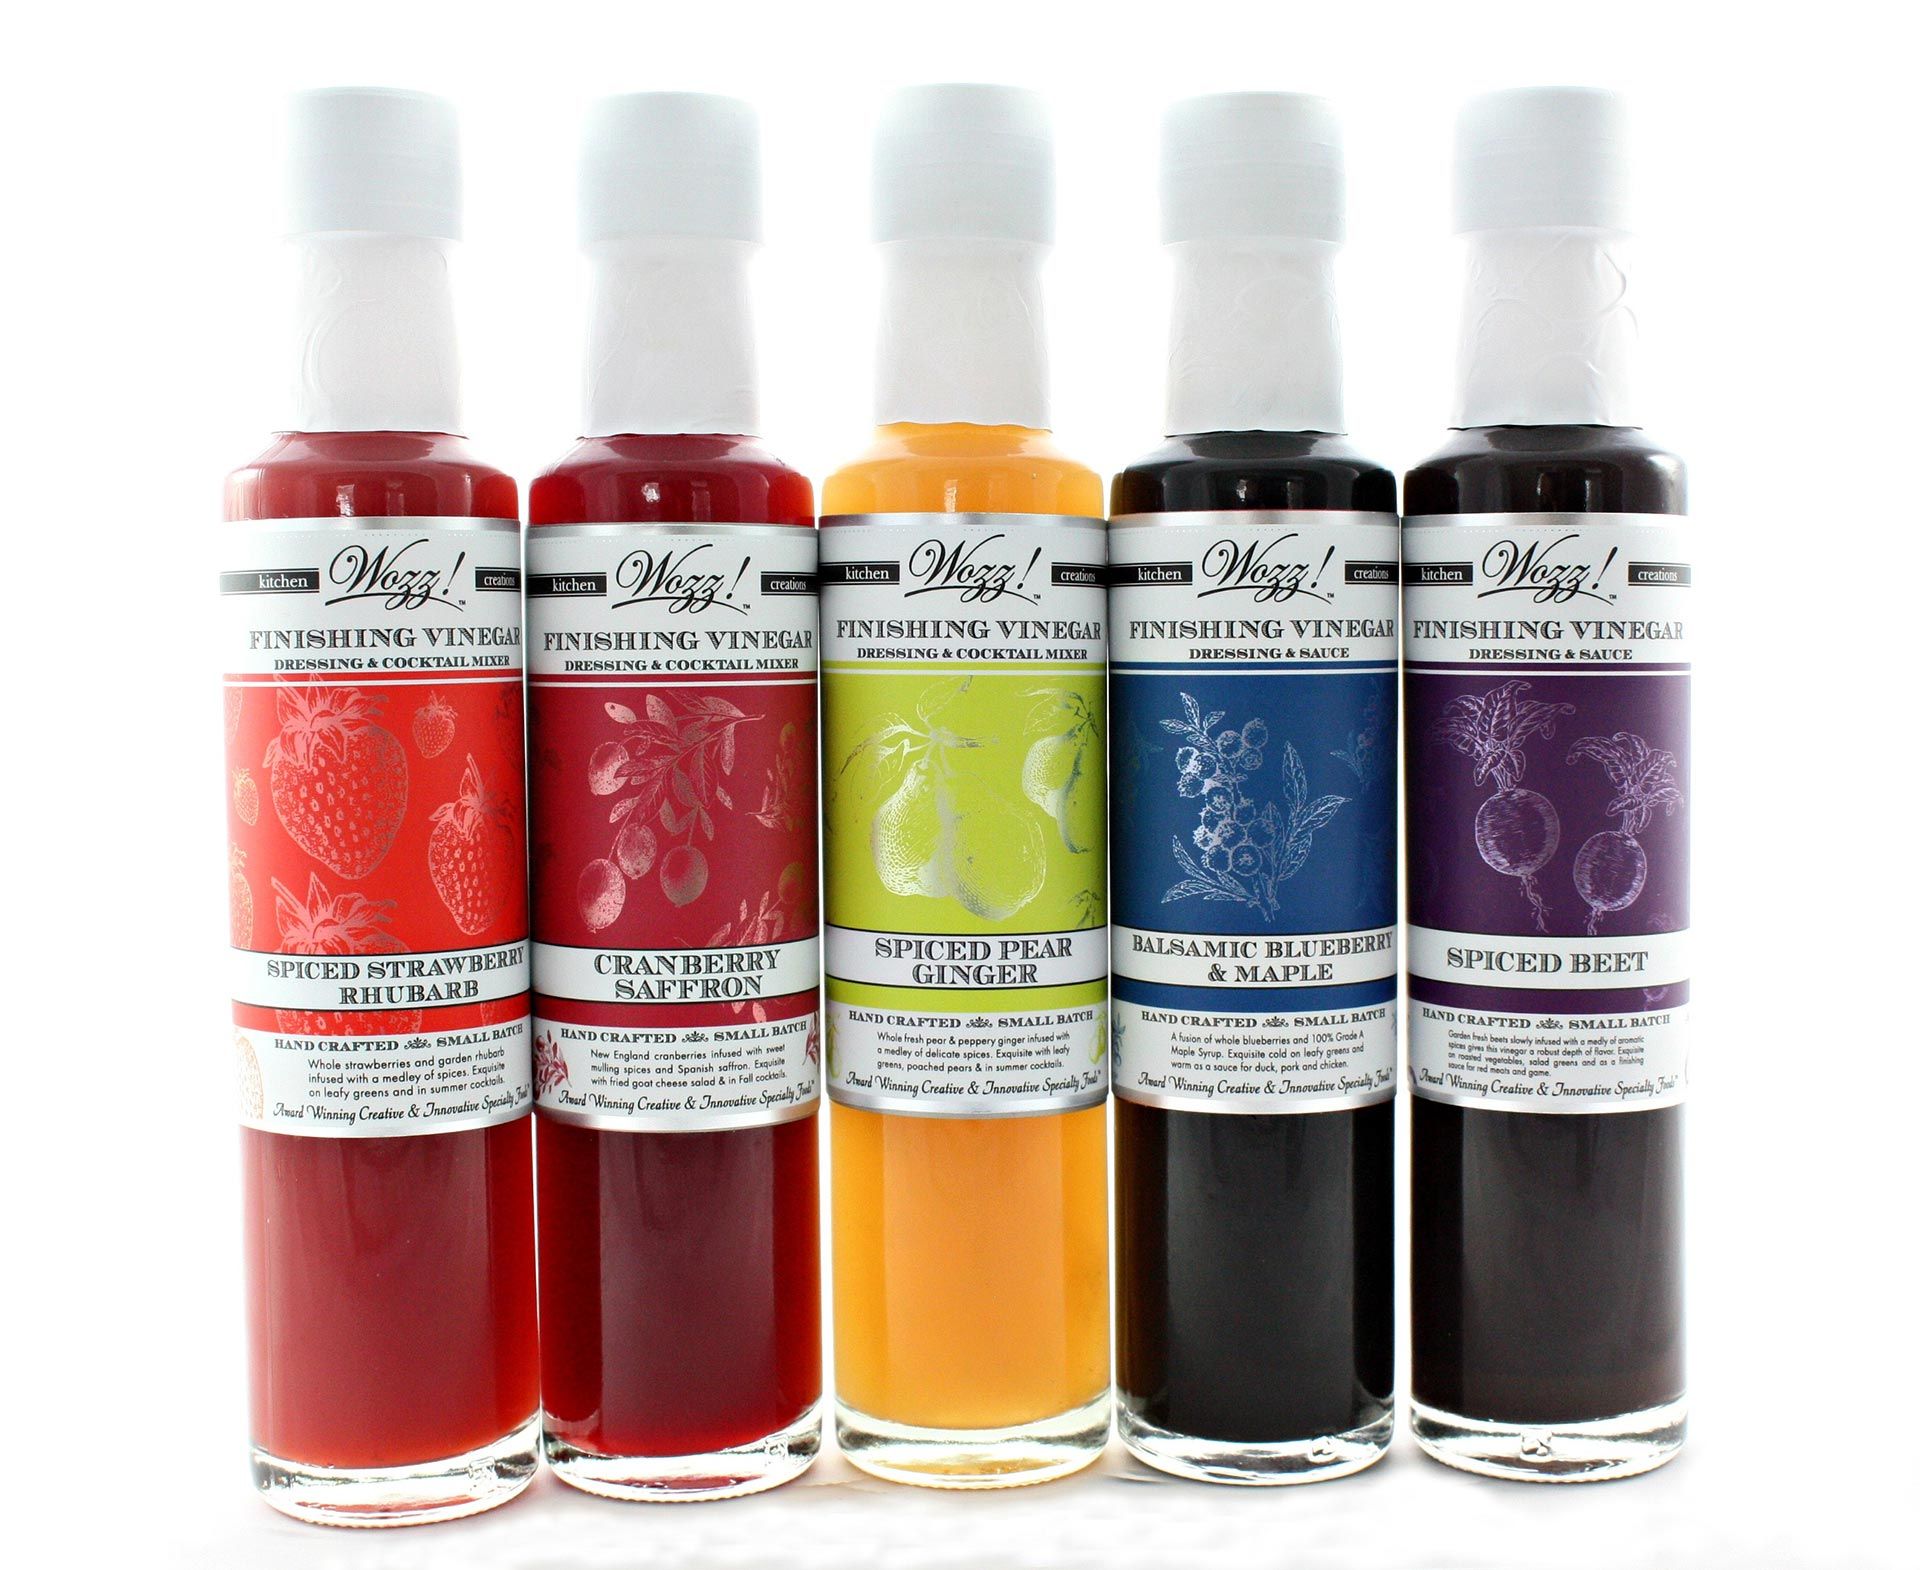 Wozz! Finishing Vinegars lined up with colorful labels